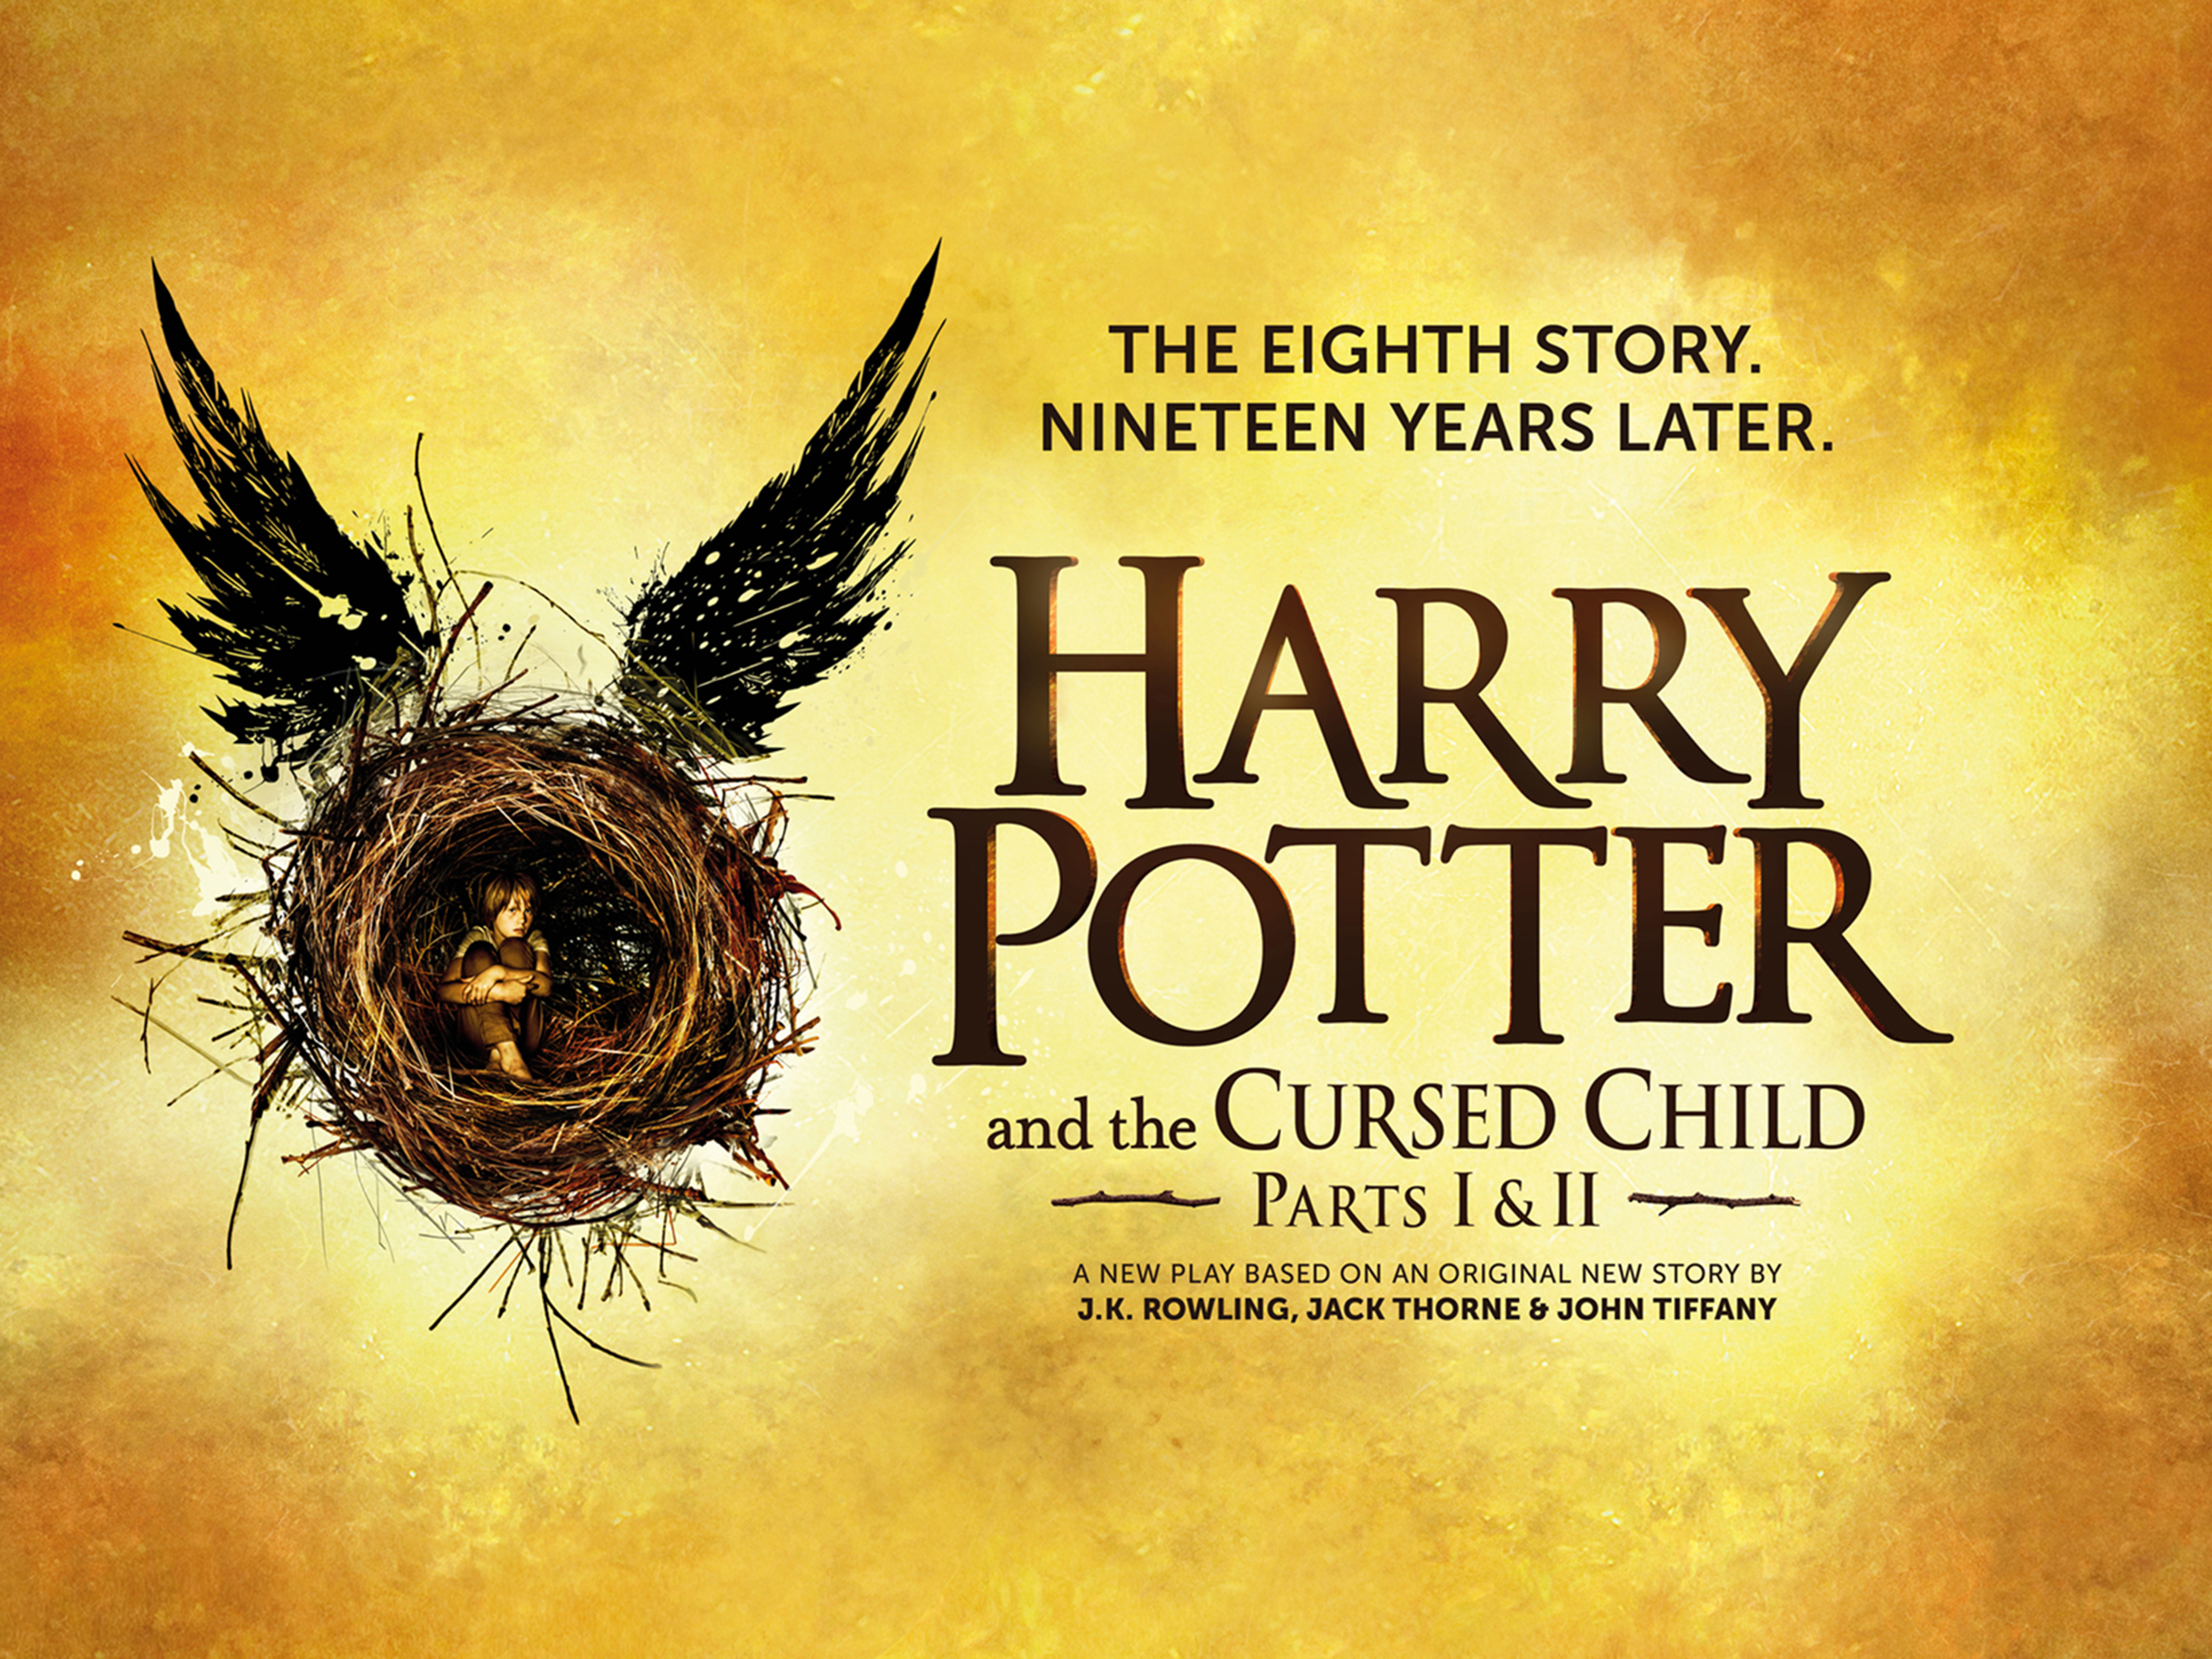 HARRY POTTER AND THE CURSED CHILD (2019)